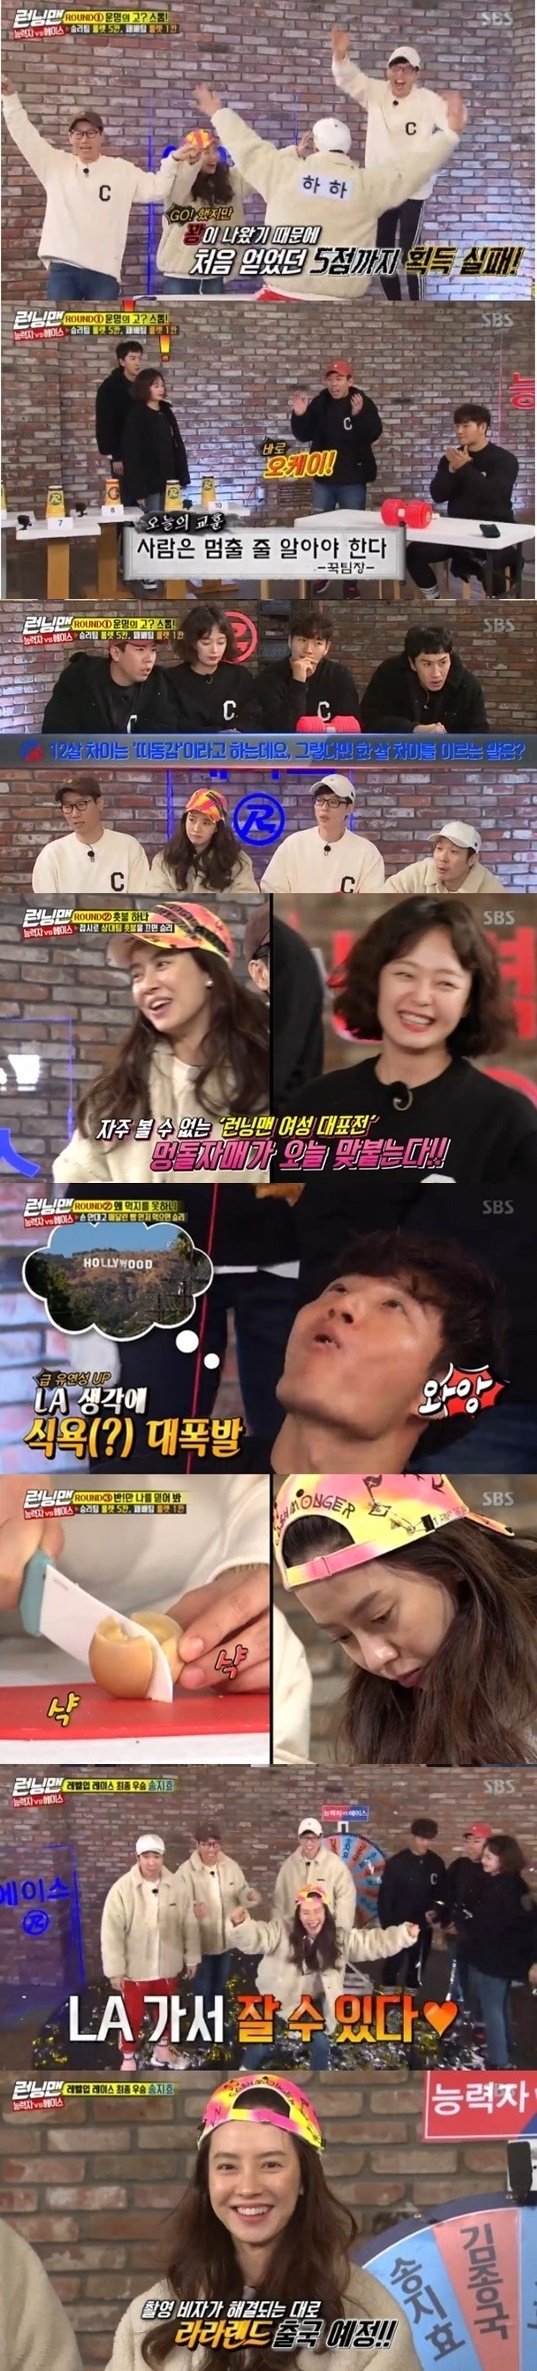 Seoul = = The ratings of Running Man have risen vertically in the confrontation between the competent and Ace.According to Nielsen Korea on November 11, SBS Running Man, which was broadcast on the 10th, showed an increase in the nationwide daily ratings of 5.7% and 7.8%.On this day, the front-line confrontation between Ace Song Ji-hyo, the winner of the first project race Level-up Race in the new year, and Kim Jong-kook, the talented person, was held.The winner was able to pick one of the team members and get the luck of going on a trip to LA together, while Song Ji-hyo and Kim Jong-kook announced their respective LA travel plans.As a team, Song Ji-hyo, Yoo Jae-Suk, Ji Suk-jin, Haha, and the talented team consisted of Kim Jong-kook, Lee Kwang-soo, Yang Se-chan and Jeon So-min.The three-round showdown was won by Roulette Khan following round-by-round victories, and each team was tense with a fierce confrontation. Round 1 Go of Destiny? Stop!, Yoo Jae-Suk and Lee Kwang-soos Kangson Parade followed, but Ace team won in the performance of Goldson Song Ji-hyo.The second round was a game victory by the Ace team, but the Ace team did not overturn the Ace teams dominance, and the third round also took the Ace team victory.Song Ji-hyo, who took more roulette compartments in particular, turned roulette into a final showdown with Kim Jong-kook, and Roulette stopped in Song Ji-hyos name.The scene jumped to 9.8% of the highest audience rating per minute, taking the best one minute.Meanwhile, Running Man is broadcast every Sunday at 5 pm.